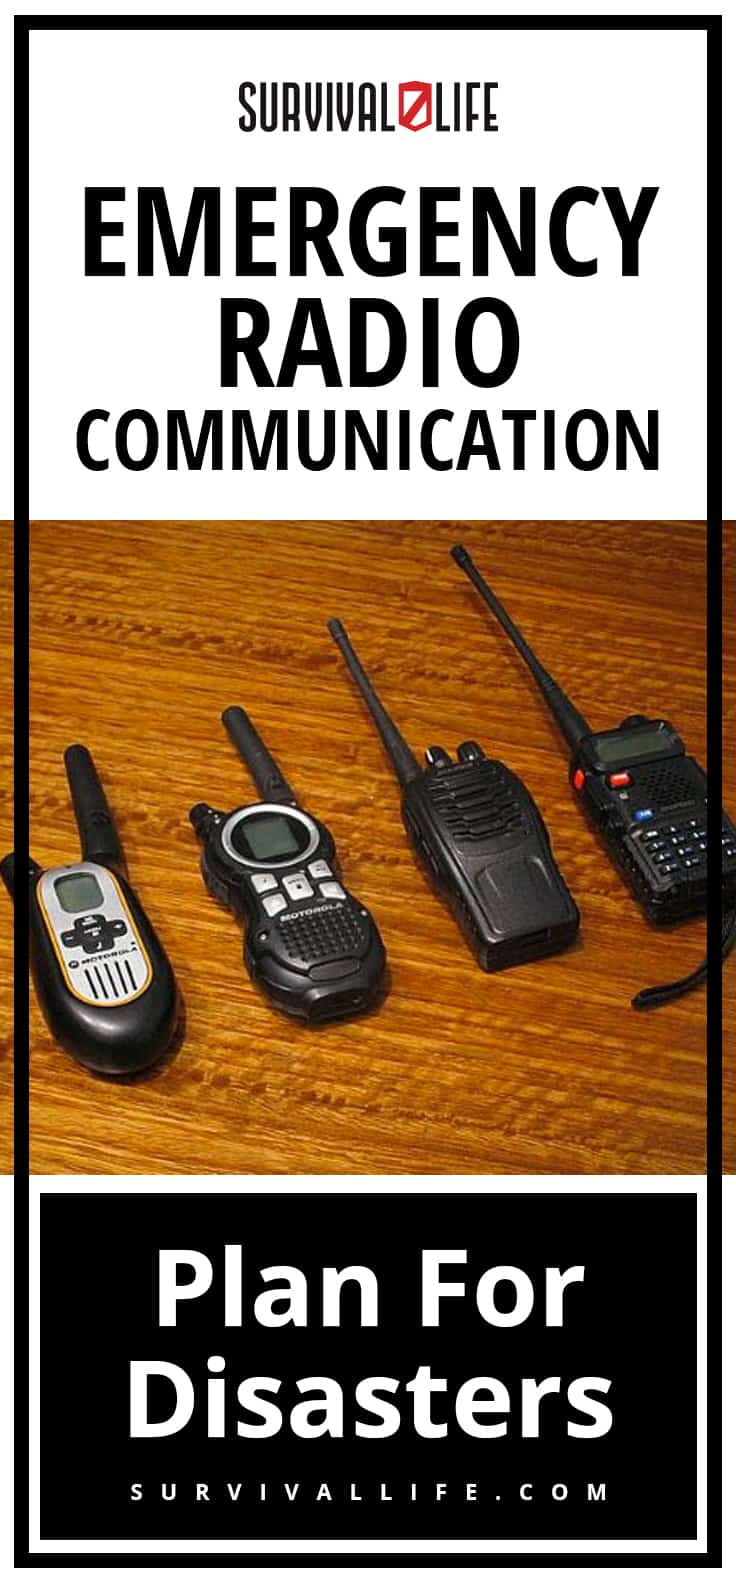 Emergency Radio Communication Plan For Disasters